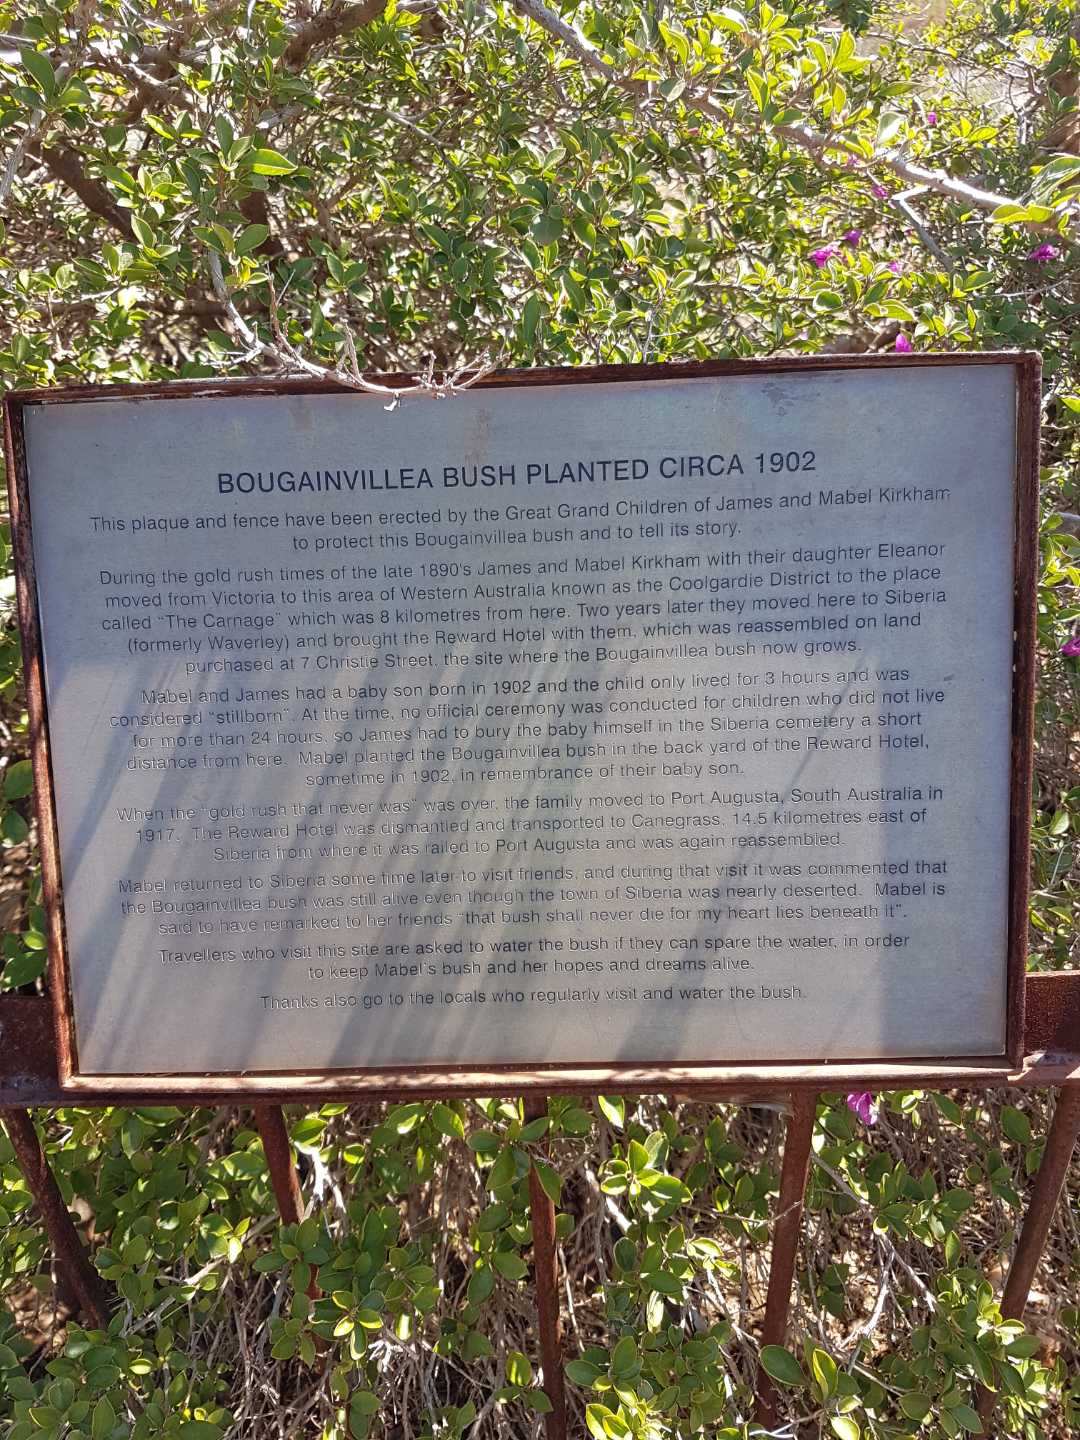 This is a photograph of the family history plaque at the site of the child's burial